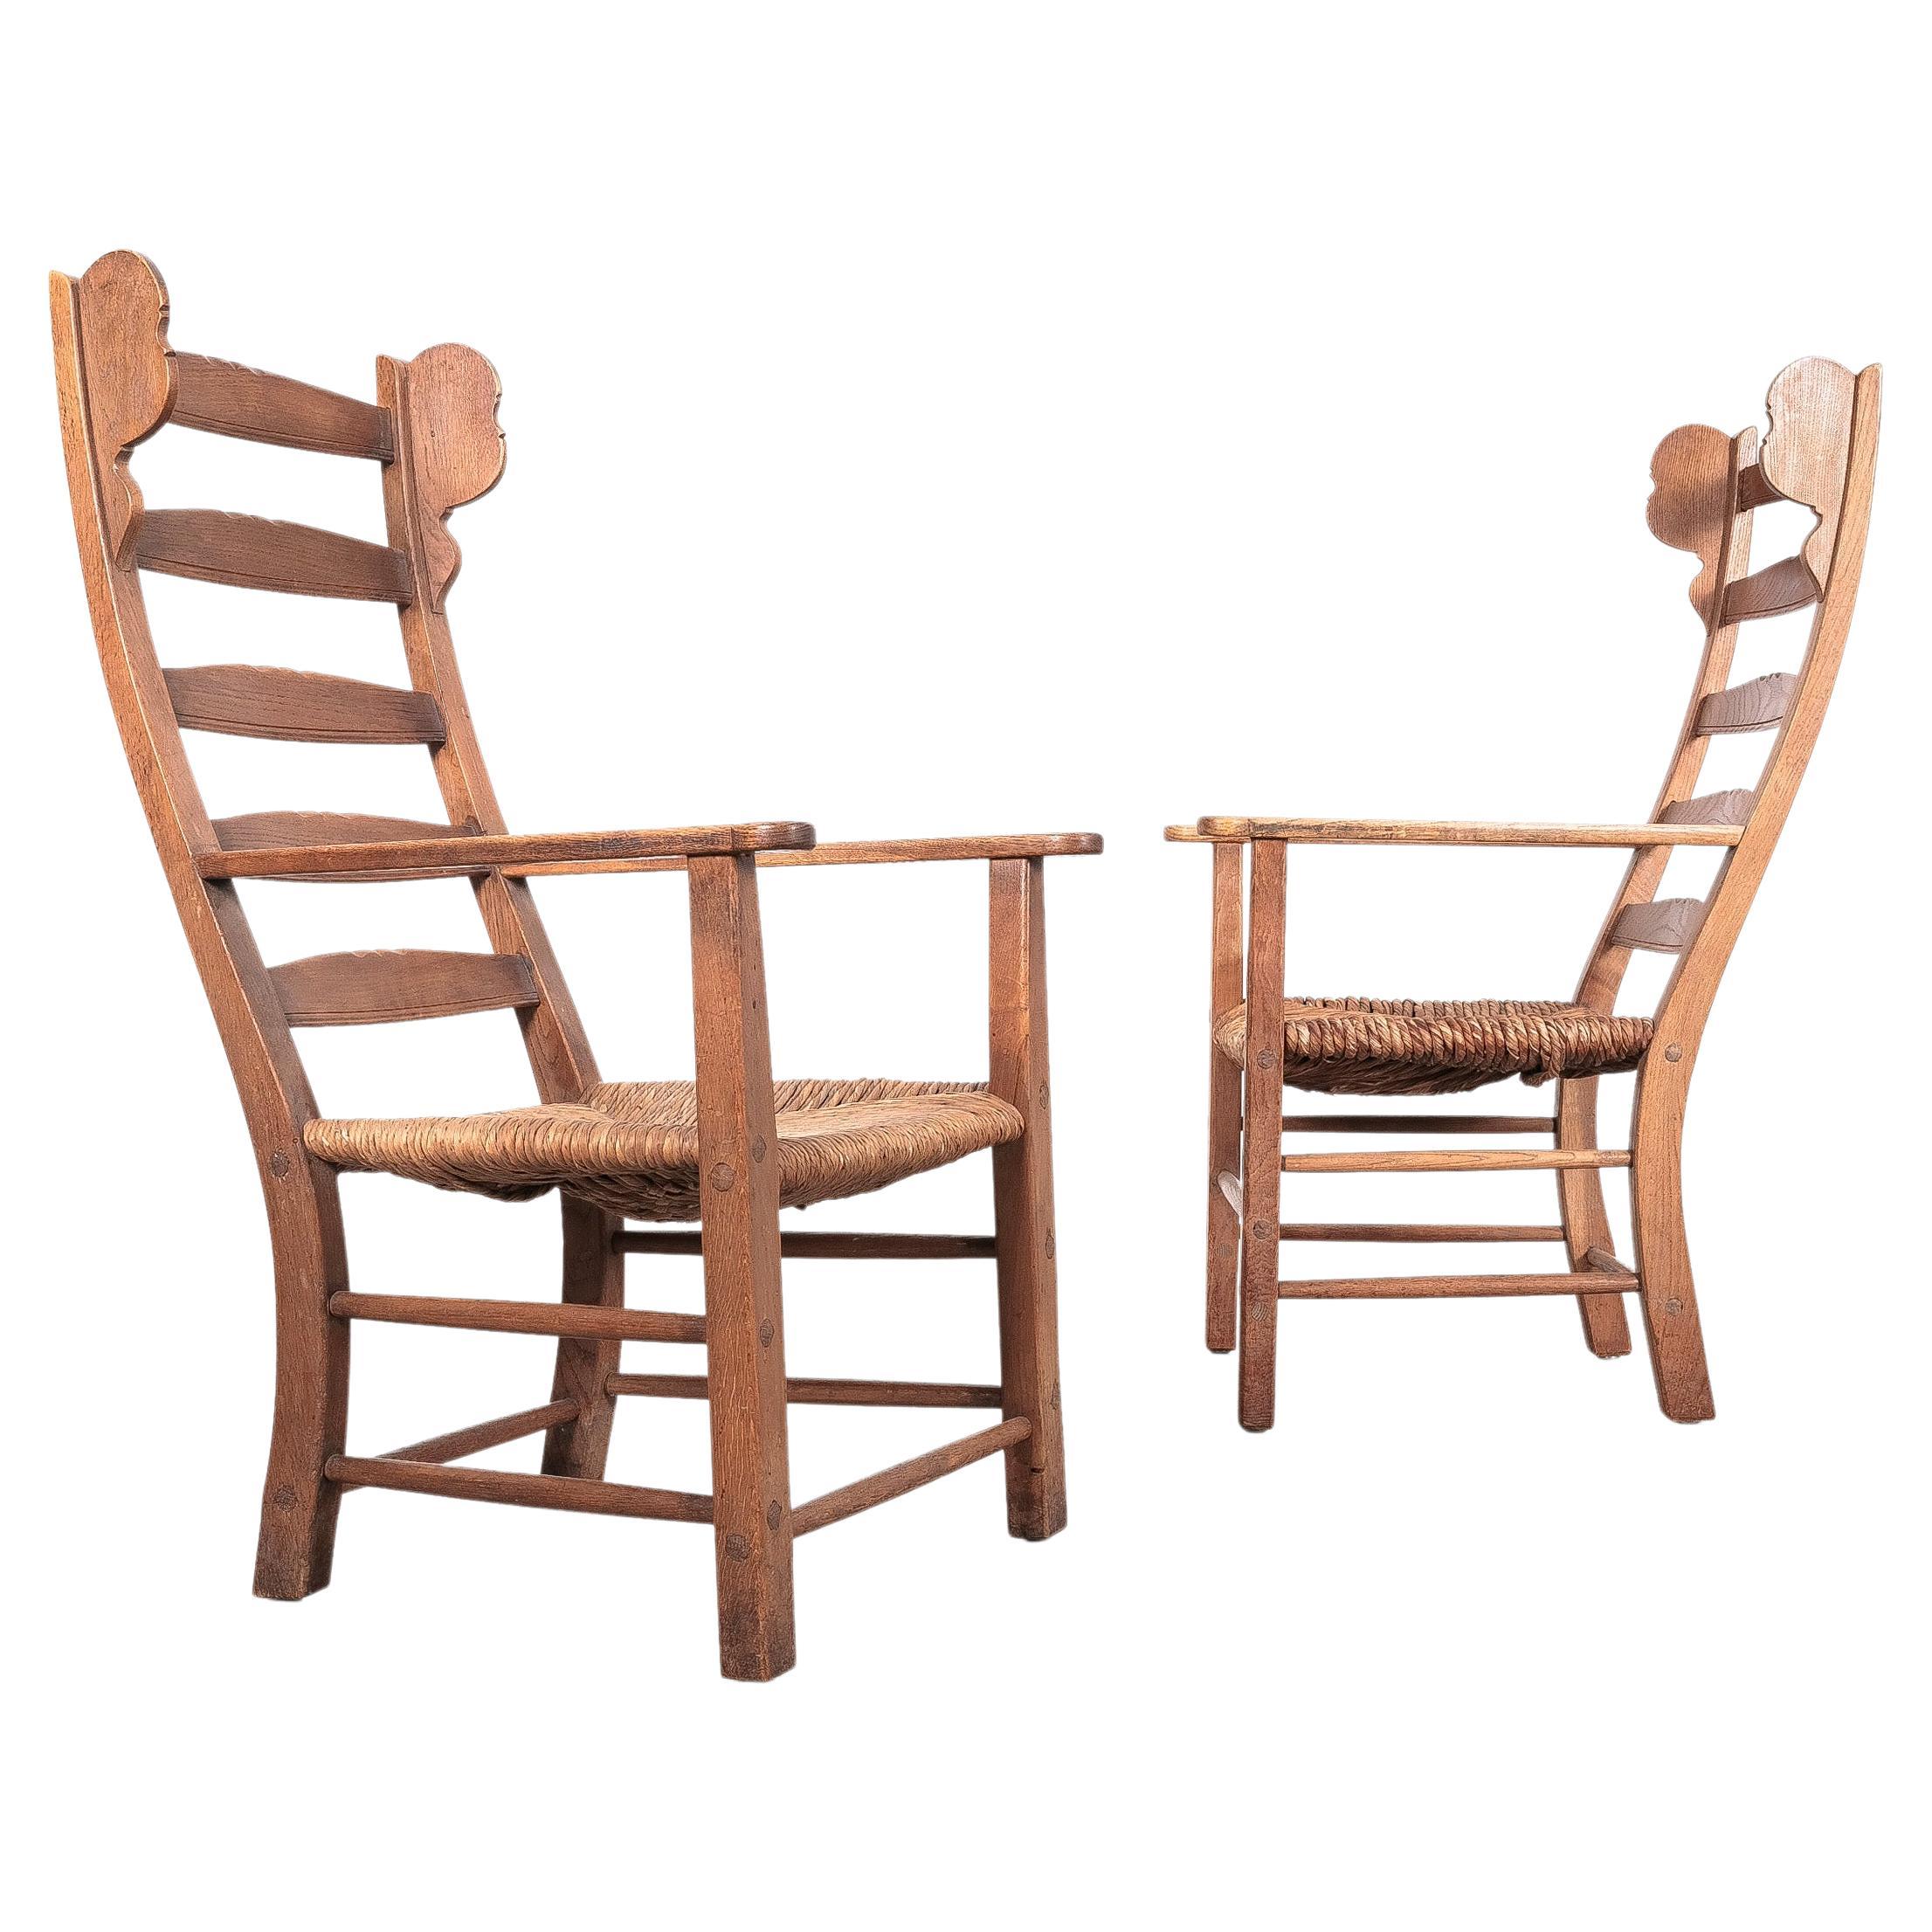 Pair of Rustic Rope Lounge Chairs Beech Wood, France, 1950 For Sale